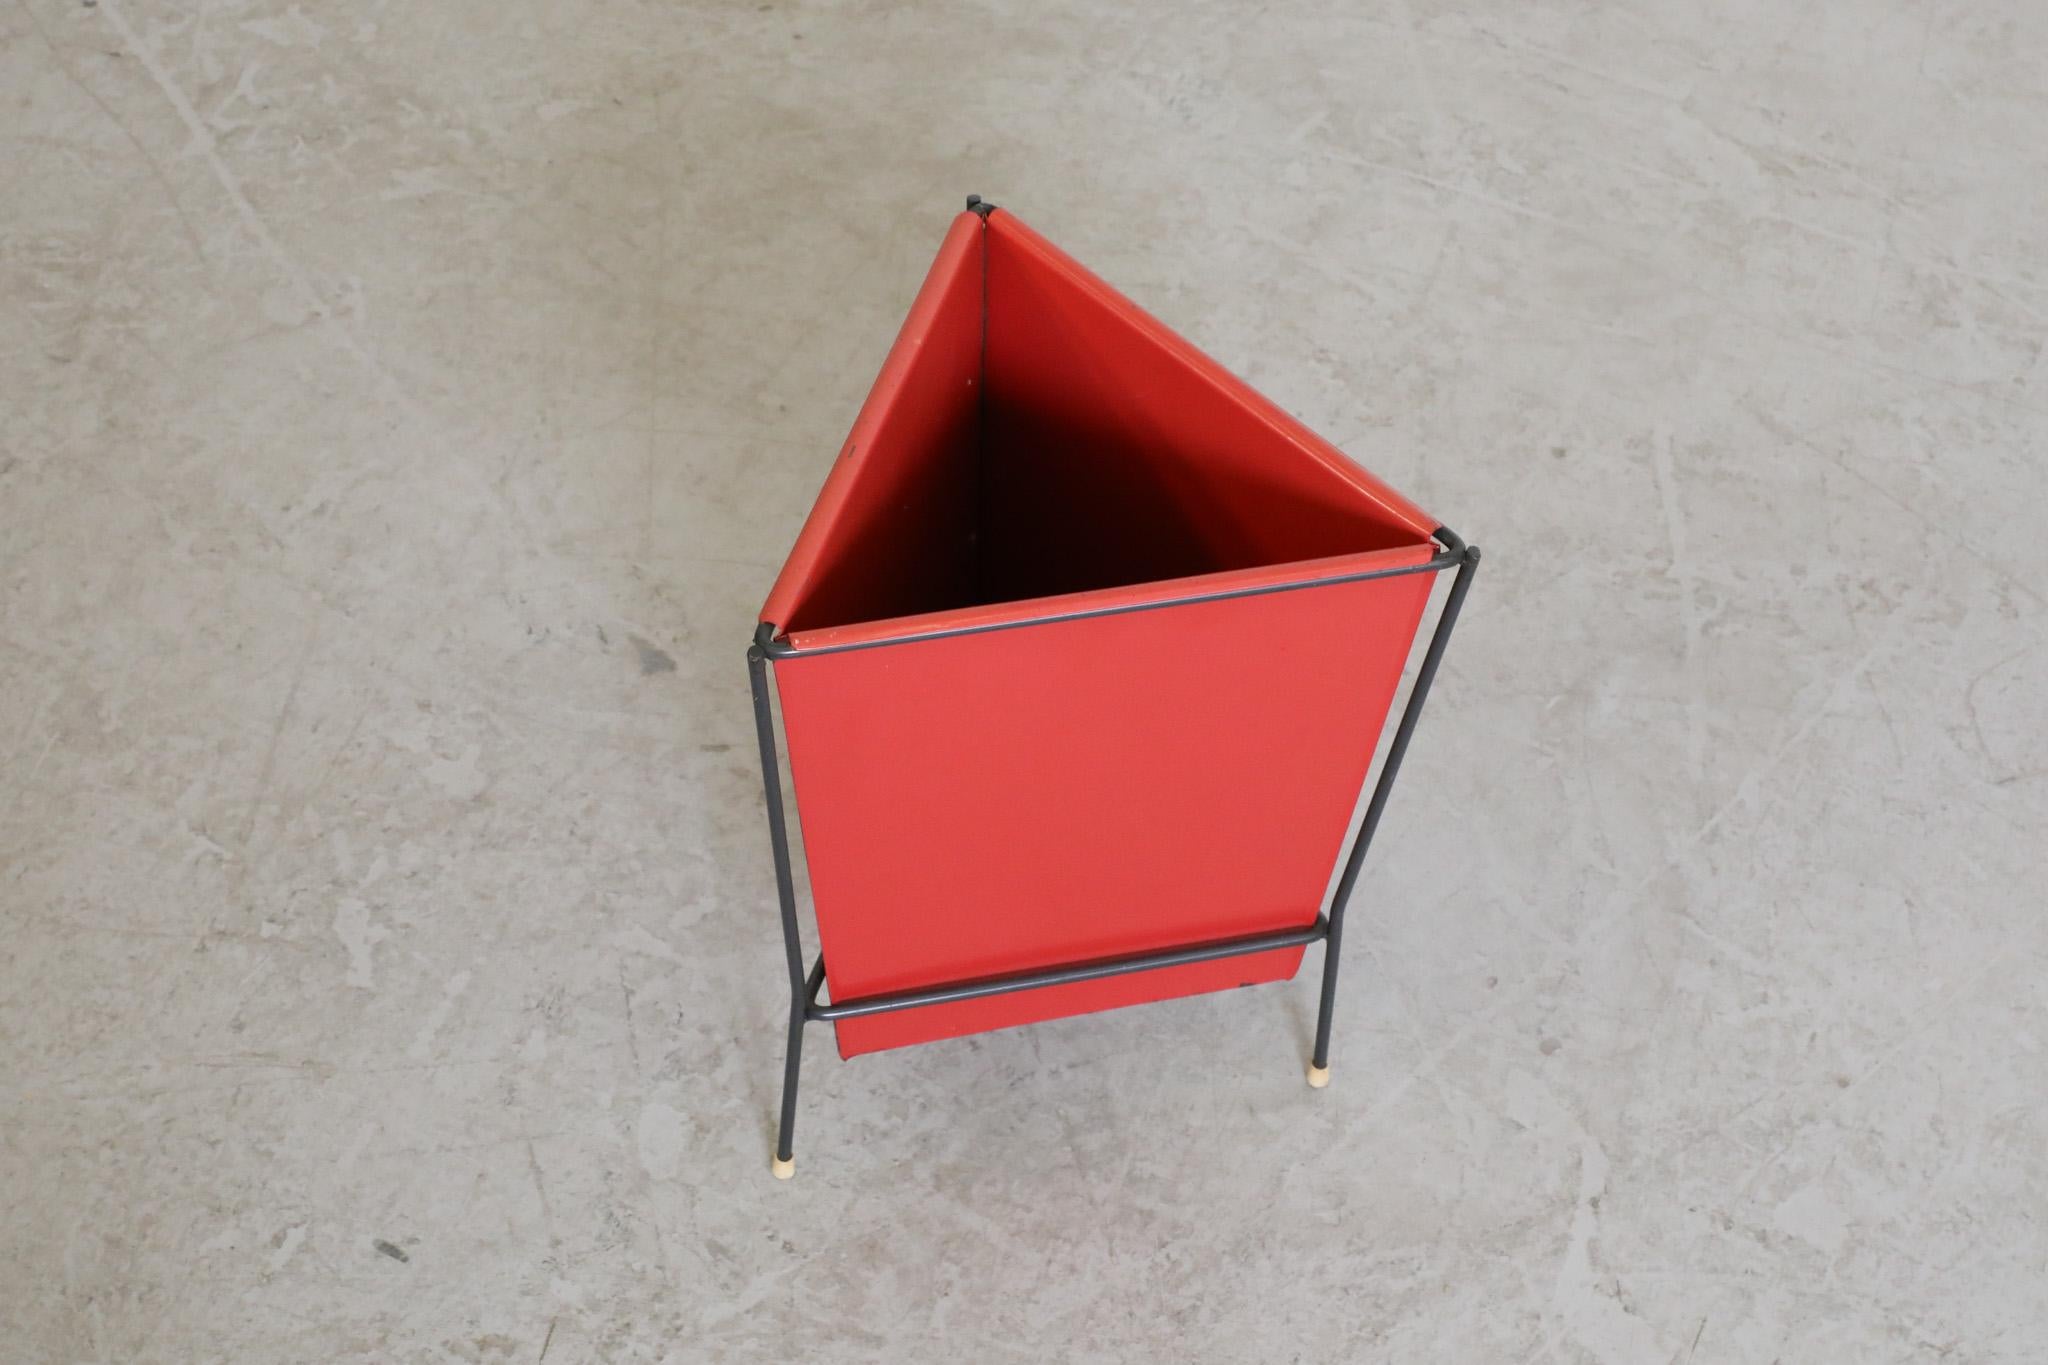 Mid-20th Century Pilastro Red Enameled Metal Triangle Bin with Black Frame For Sale